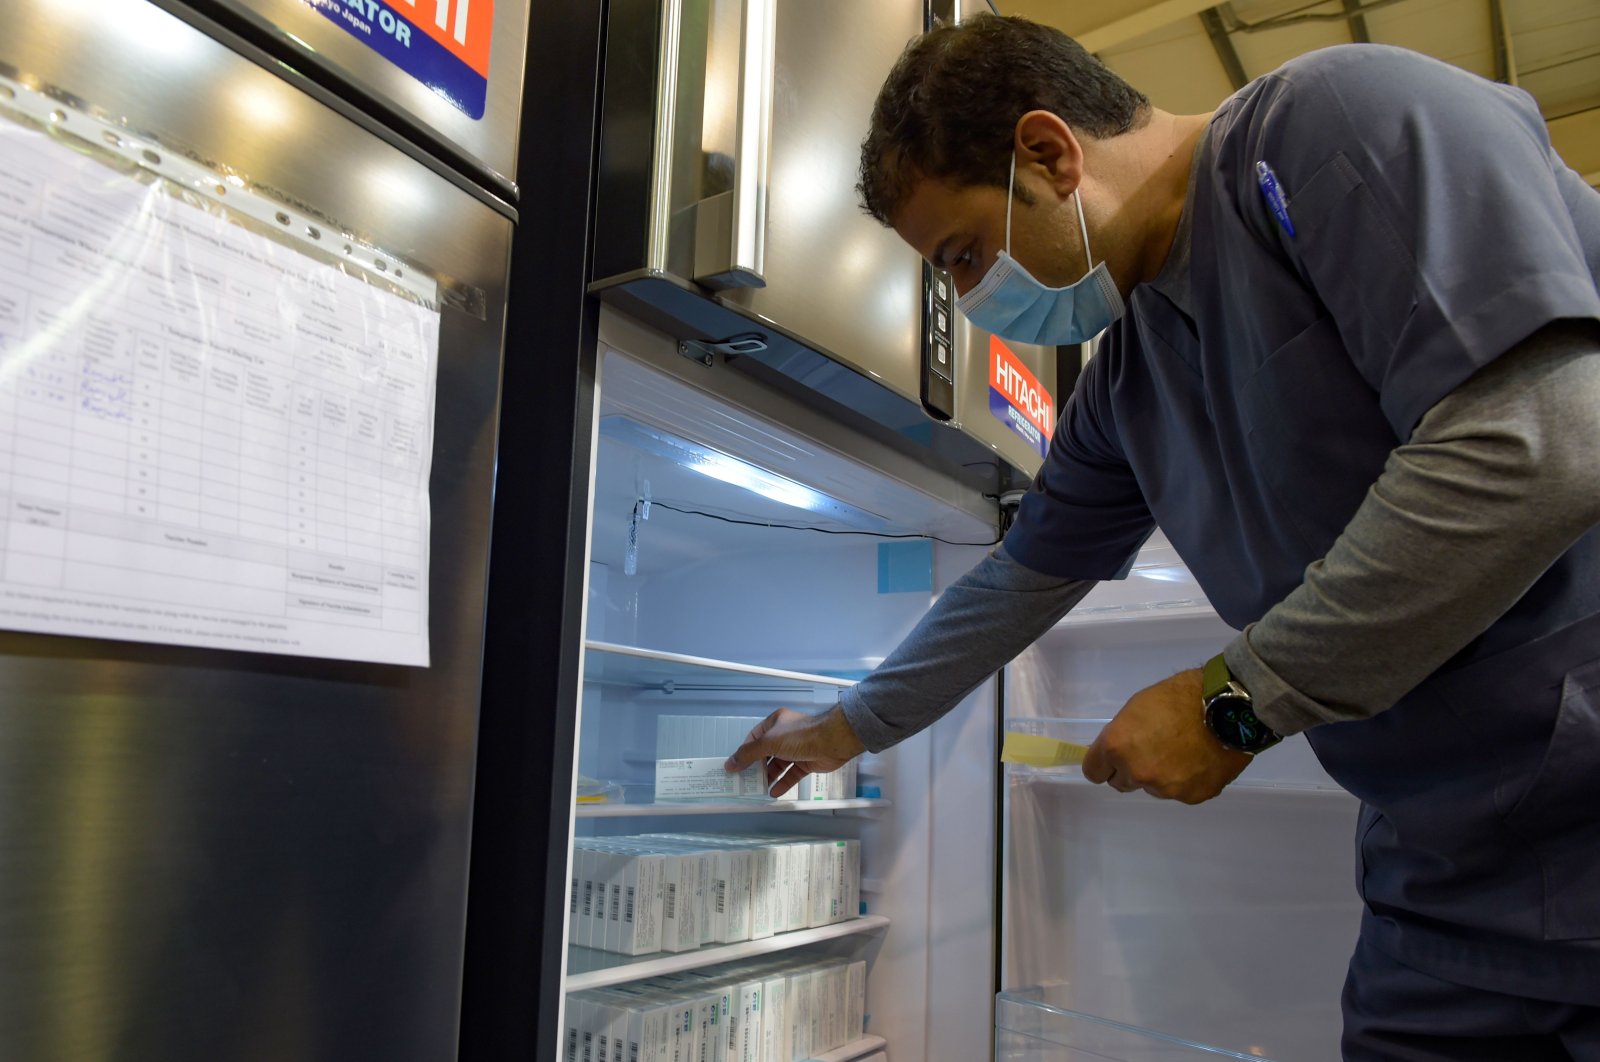 A nurse retrieves COVID-19 vaccine doses from a refrigerator at the Bahrain International Exhibition and Convention Center in the capital Manama, Bahrain, Dec. 24, 2020. (AFP Photo)